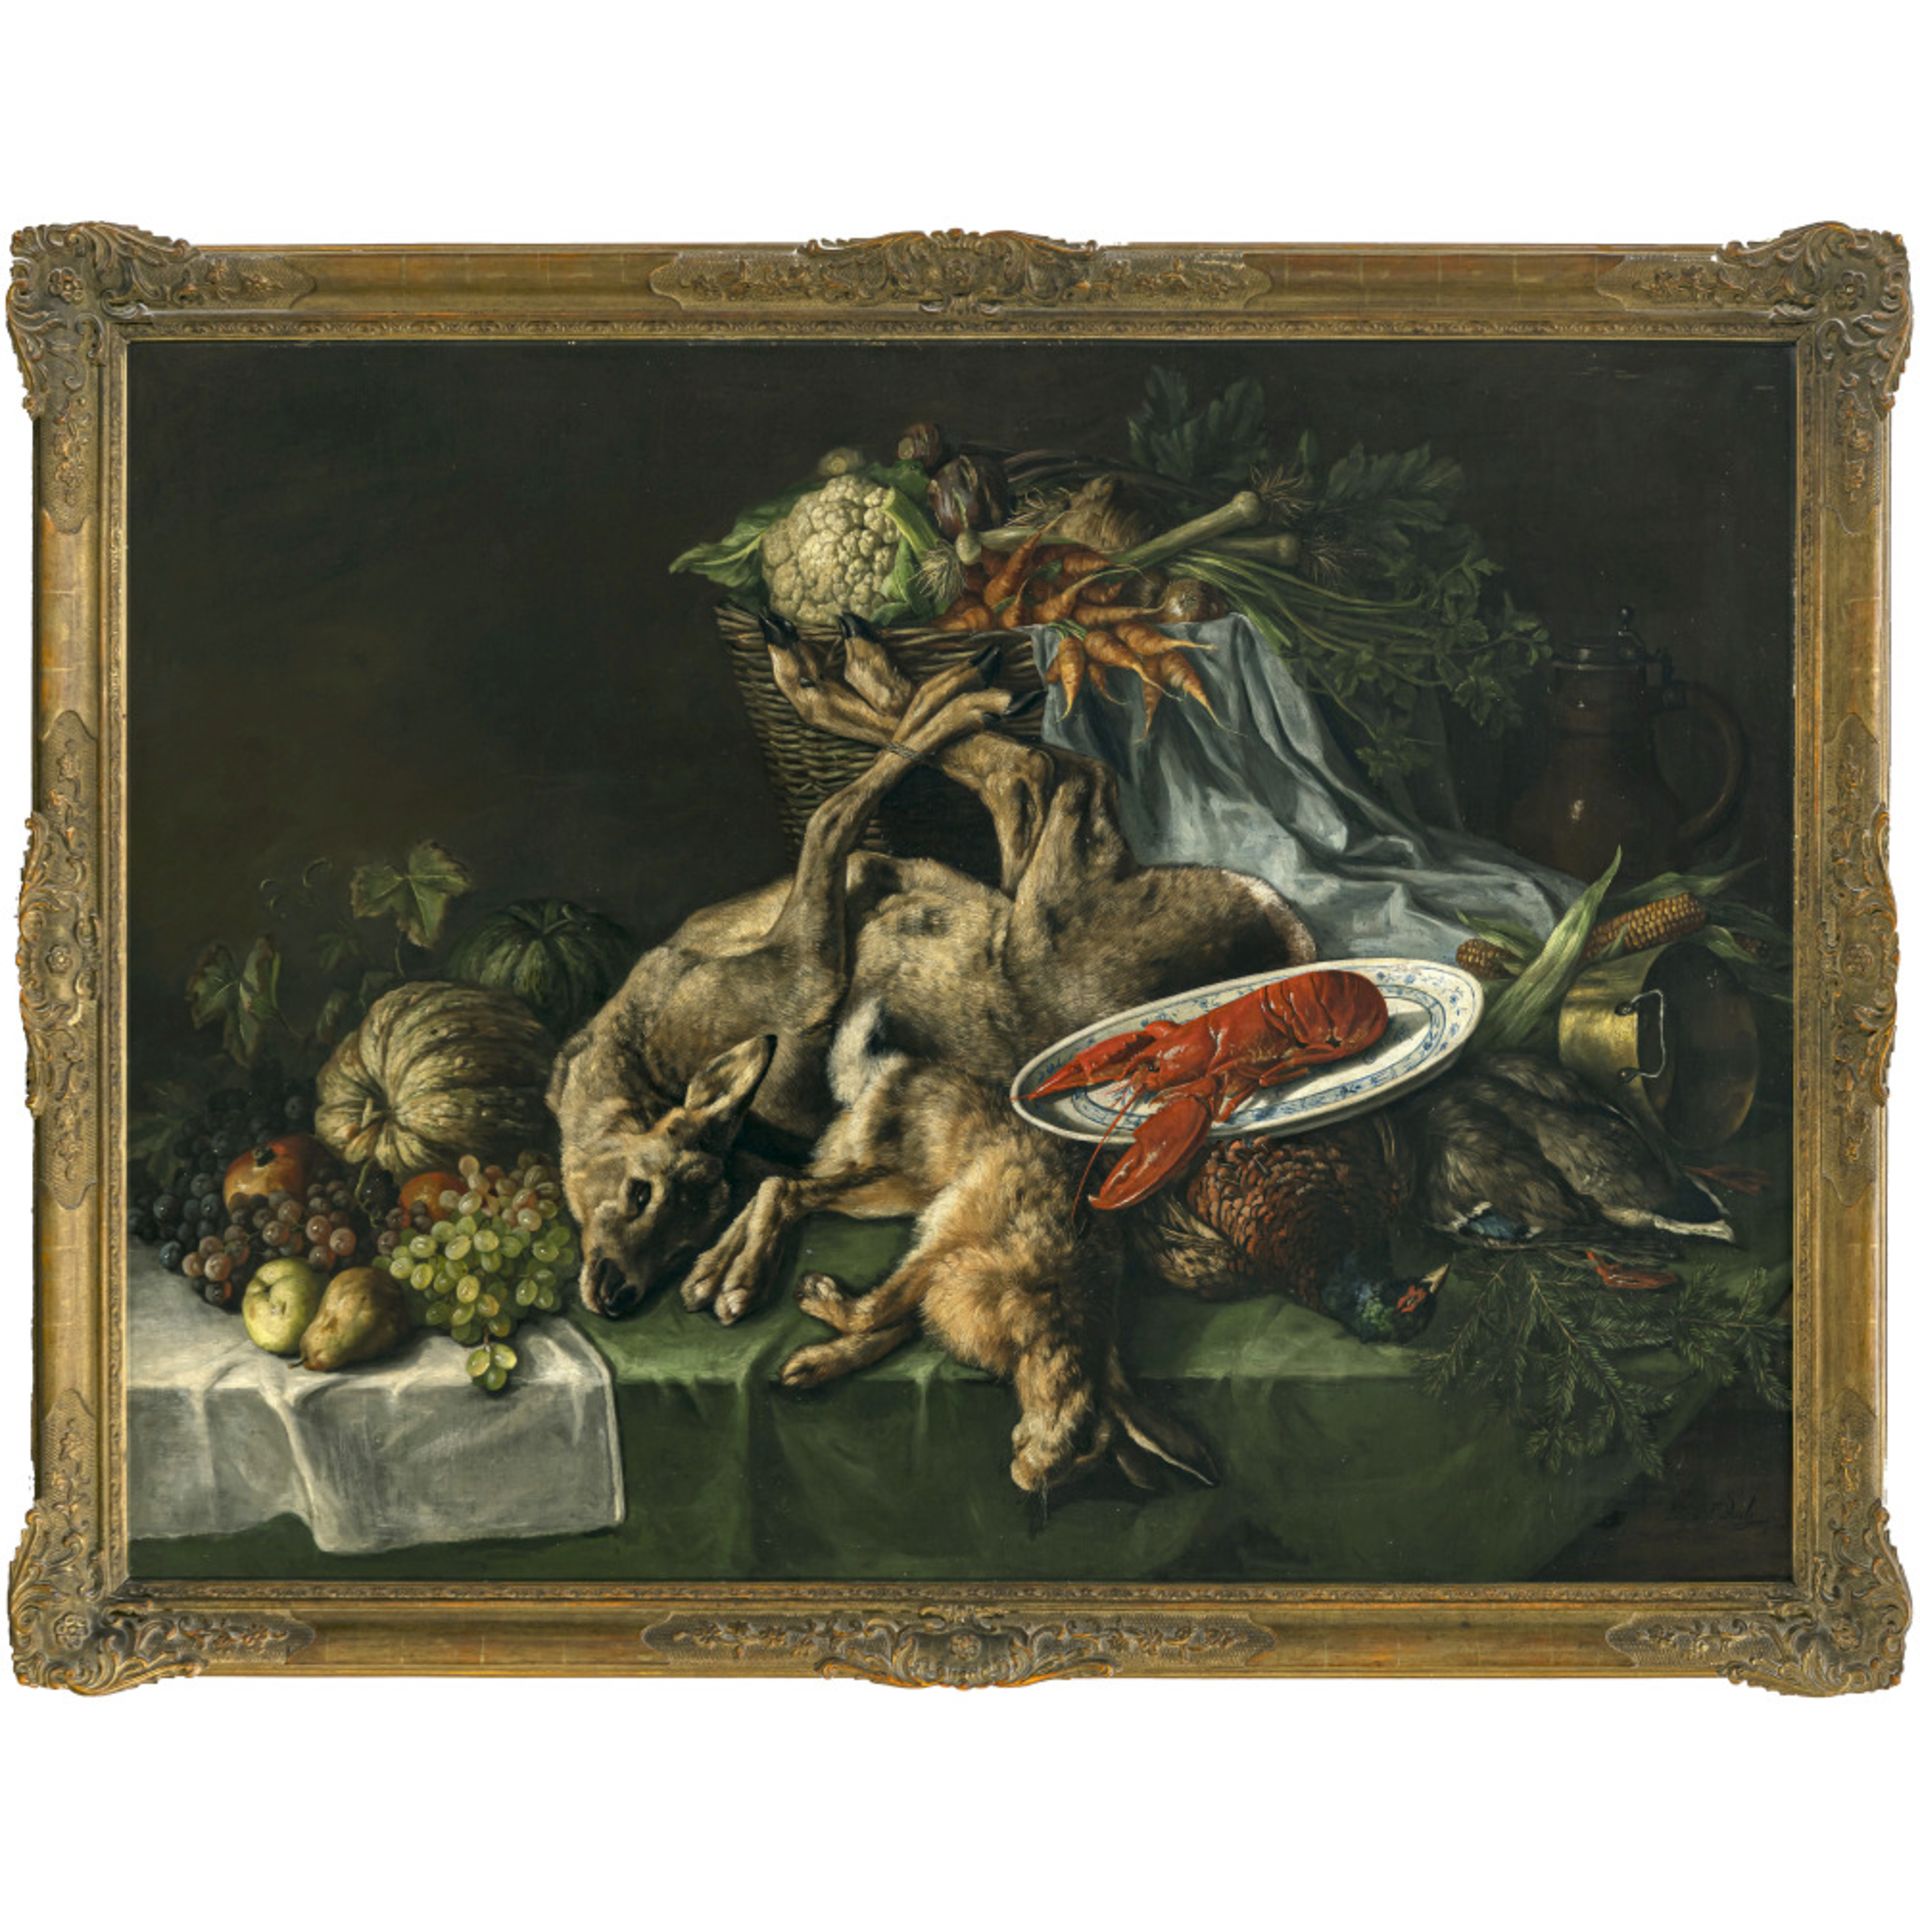 Friedrich van den Daele - Kitchen still life with lobster, hunted game and fruit - Image 2 of 2